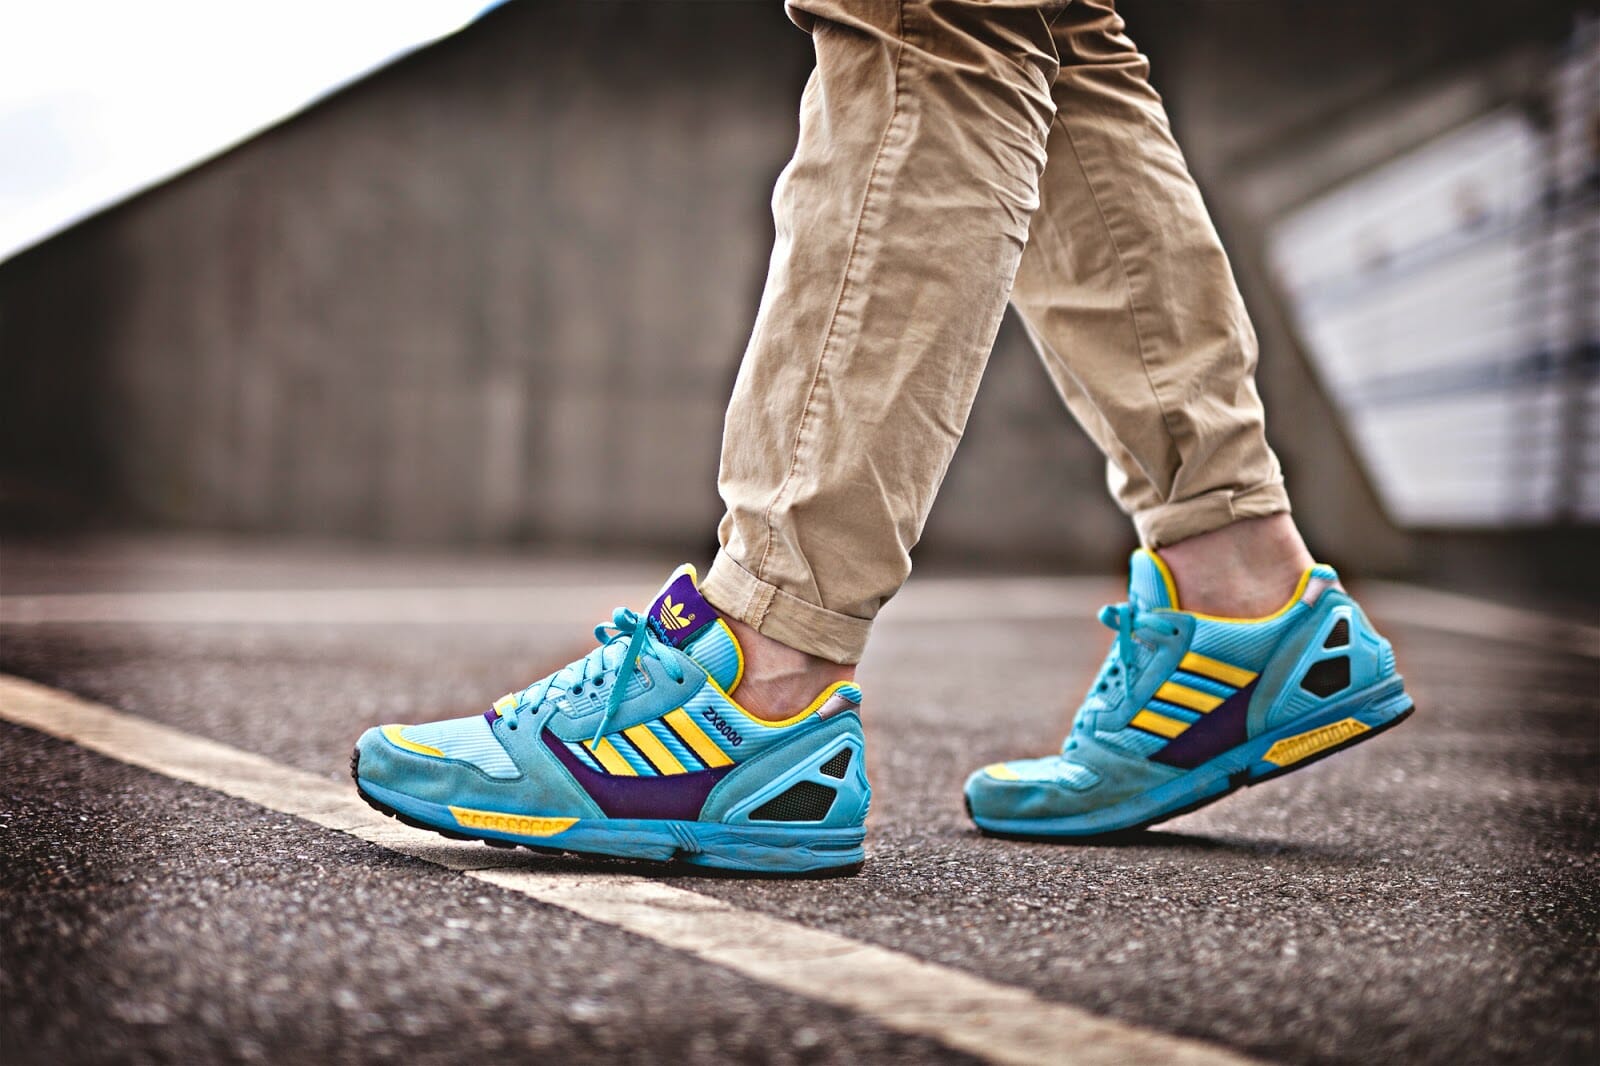 Adidas ZX8000 Aqua - All you Need to Know | Outsons | Men's ...